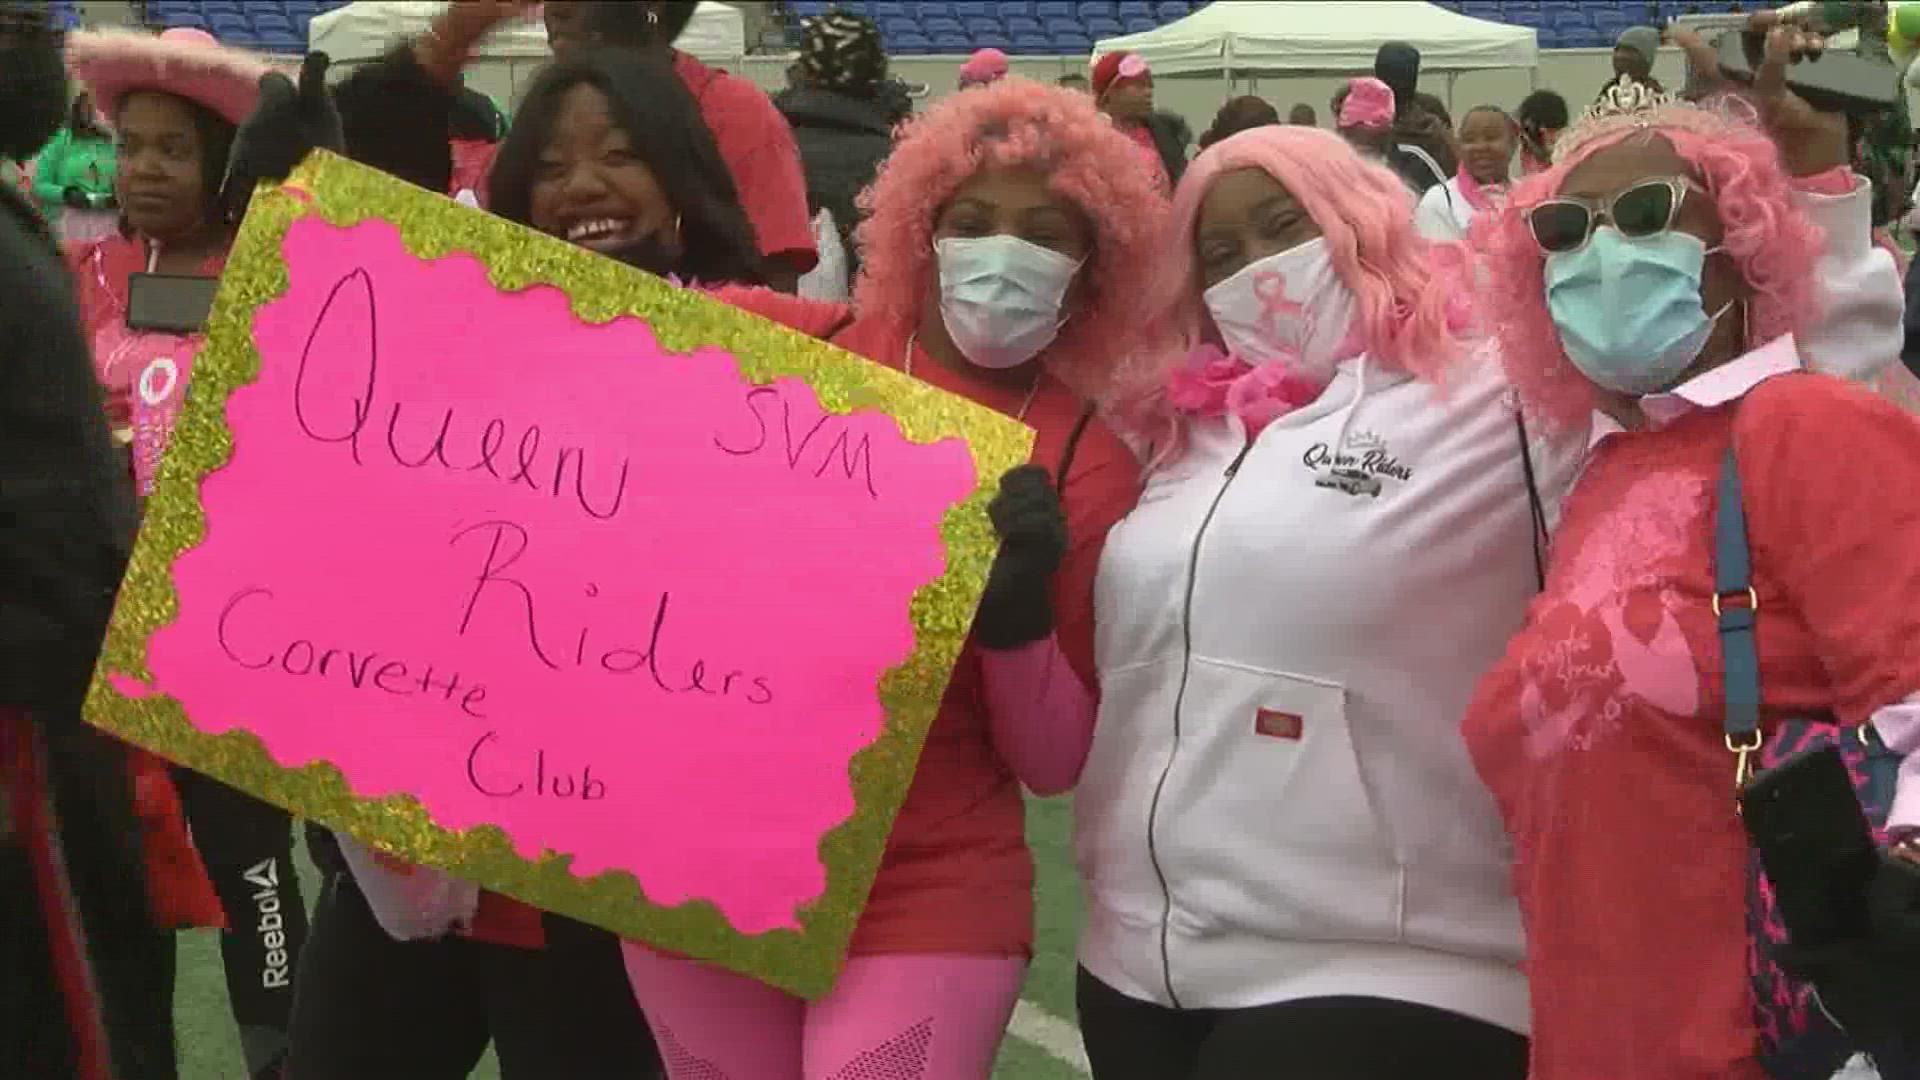 Sista Strut’s goal is to raise awareness, especially in the African American community.